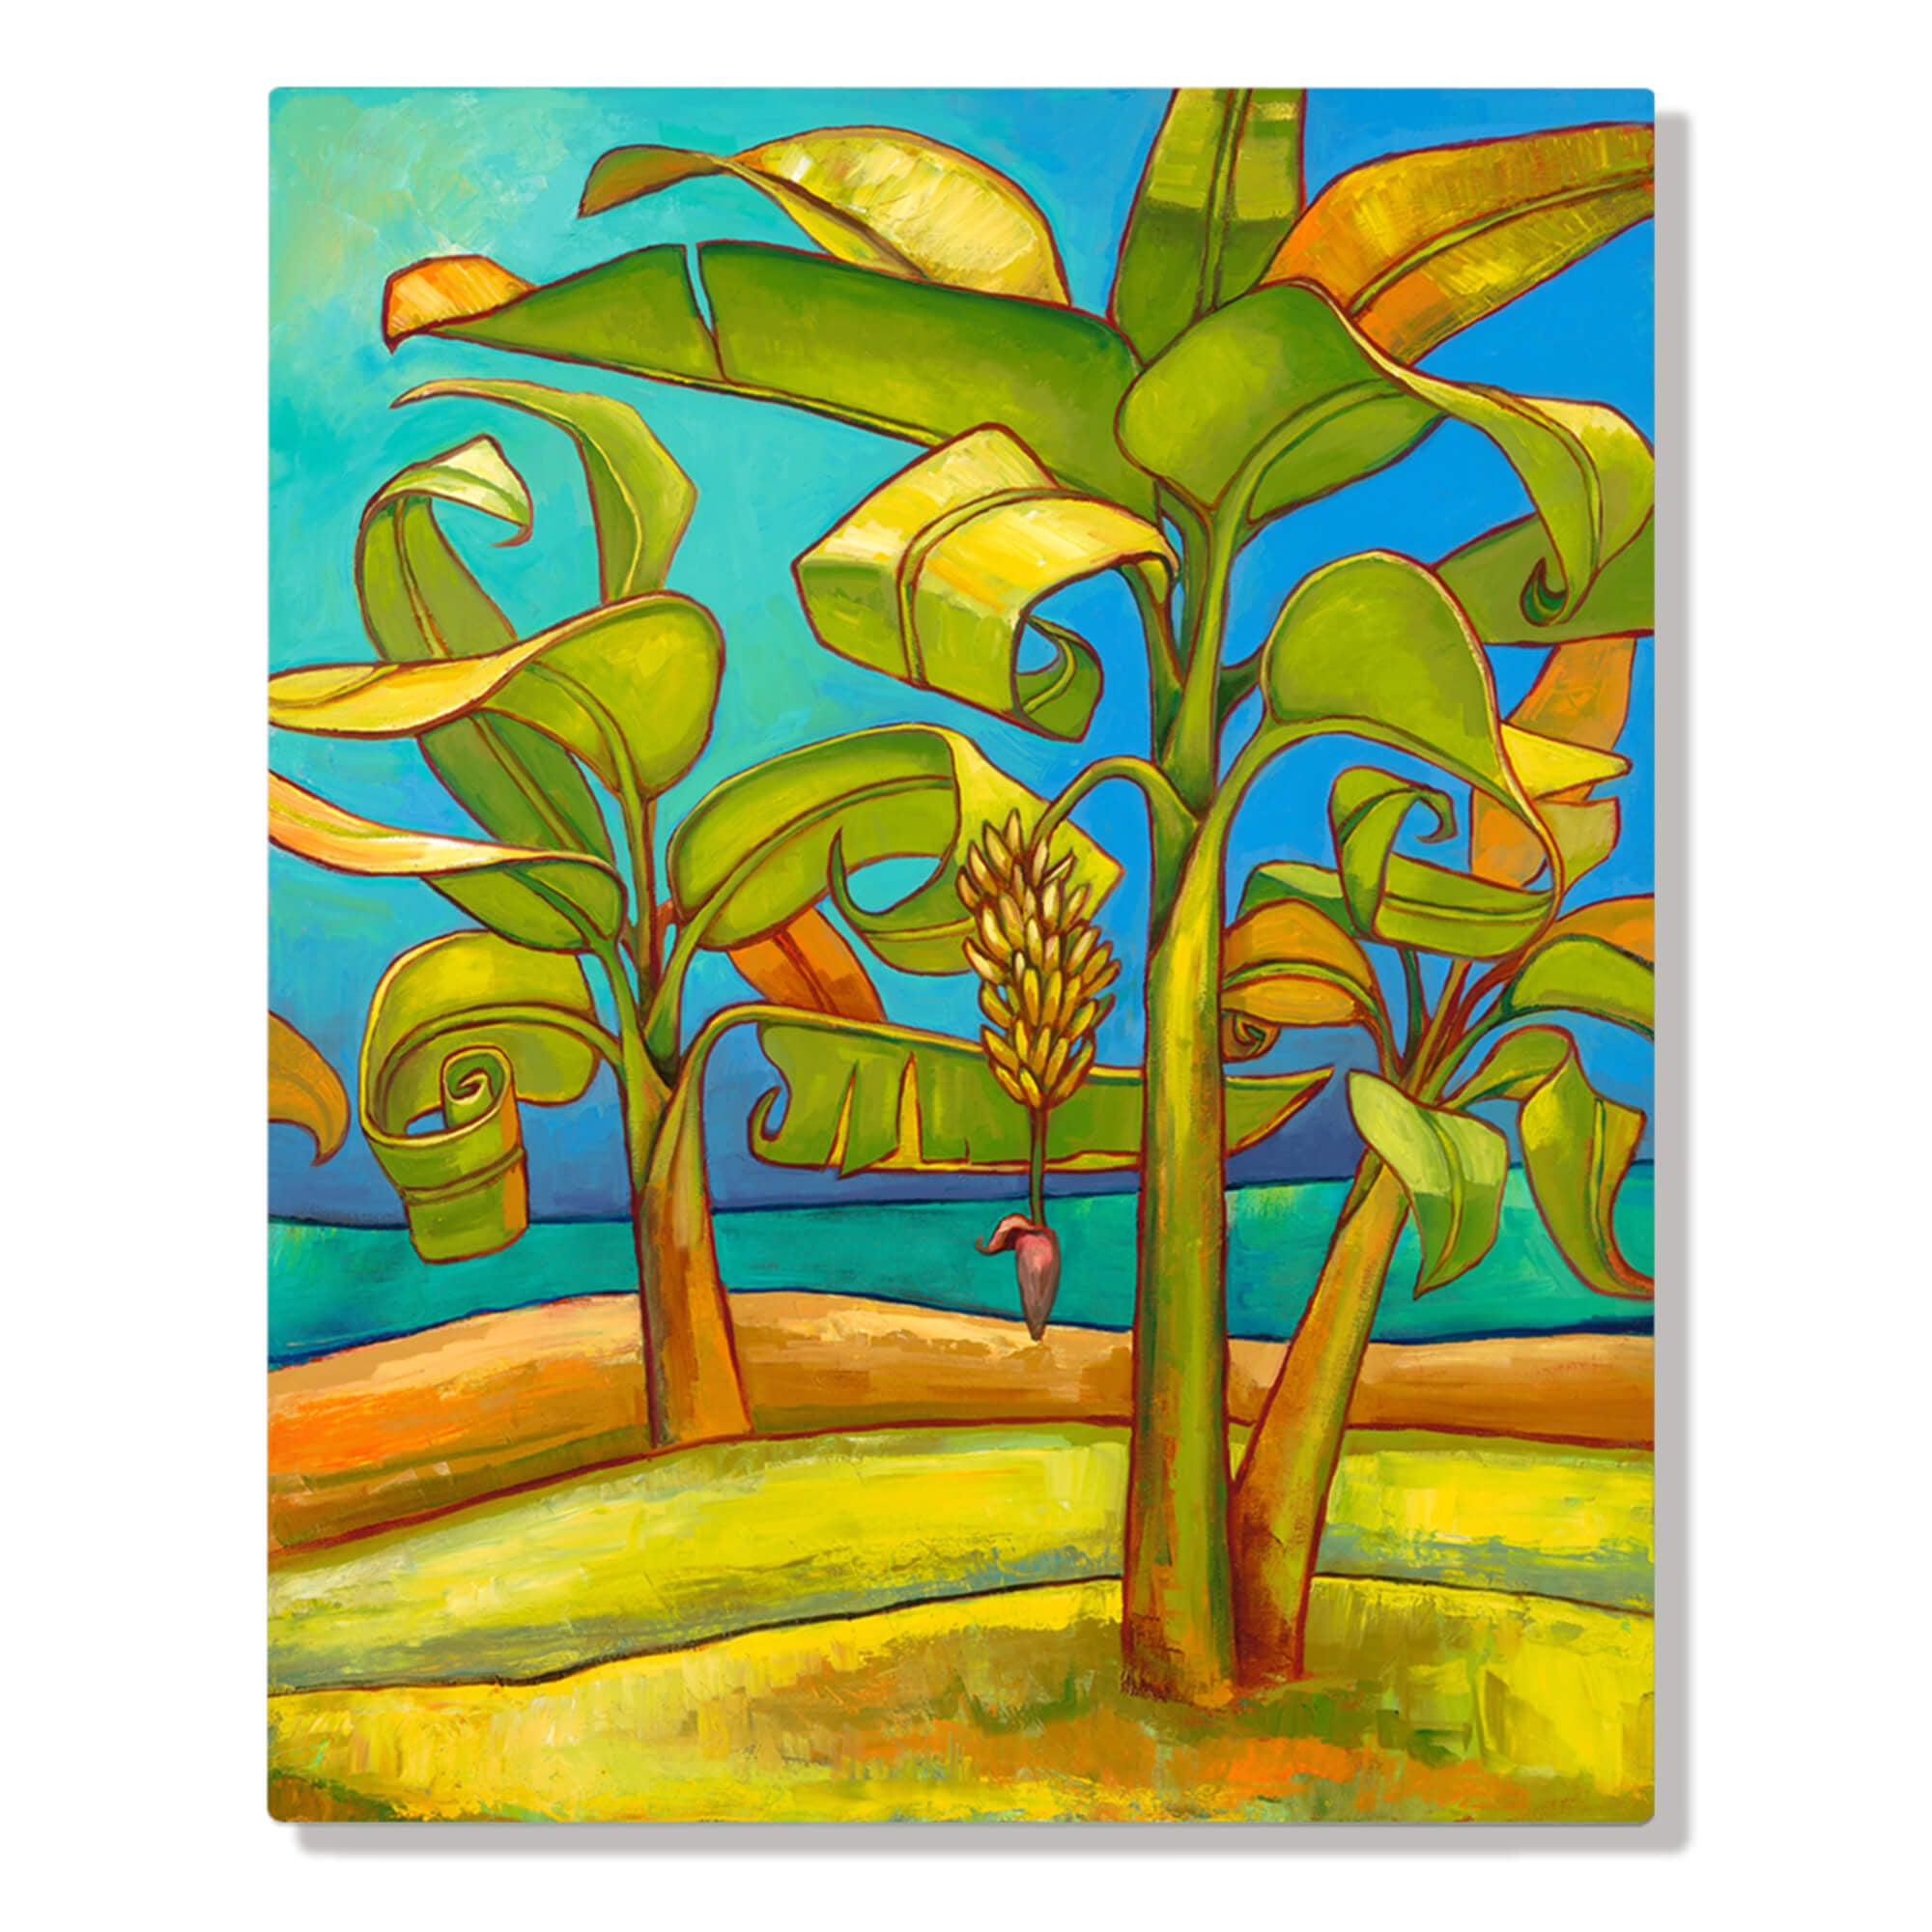 Banana tree with fruit at the beach by Hawaii artist Colin Redican